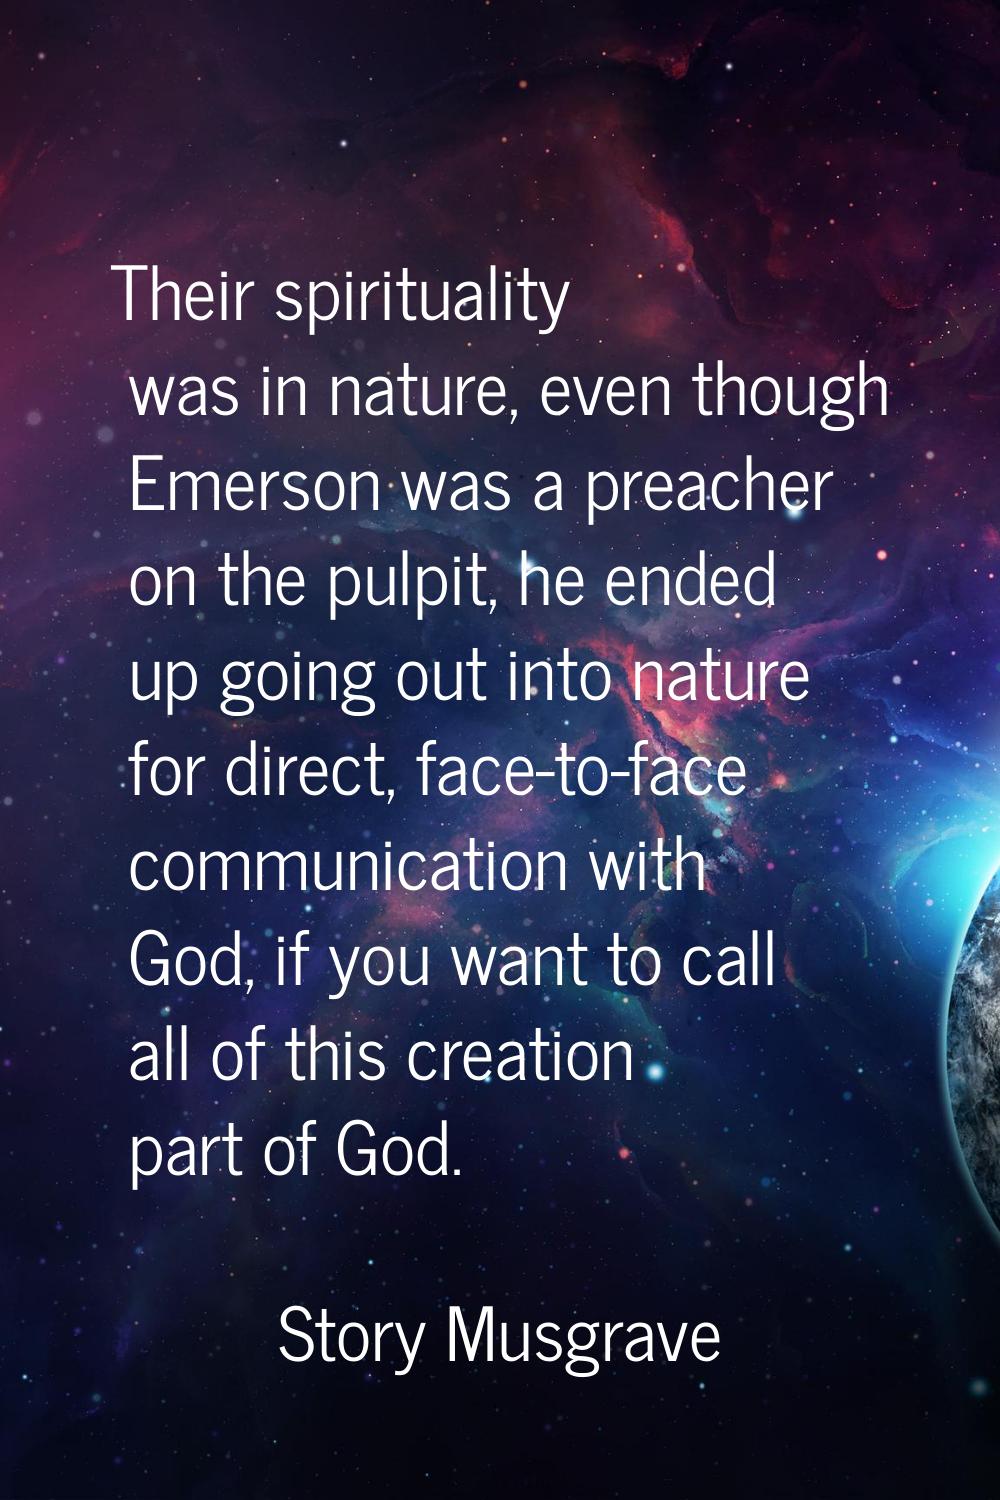 Their spirituality was in nature, even though Emerson was a preacher on the pulpit, he ended up goi